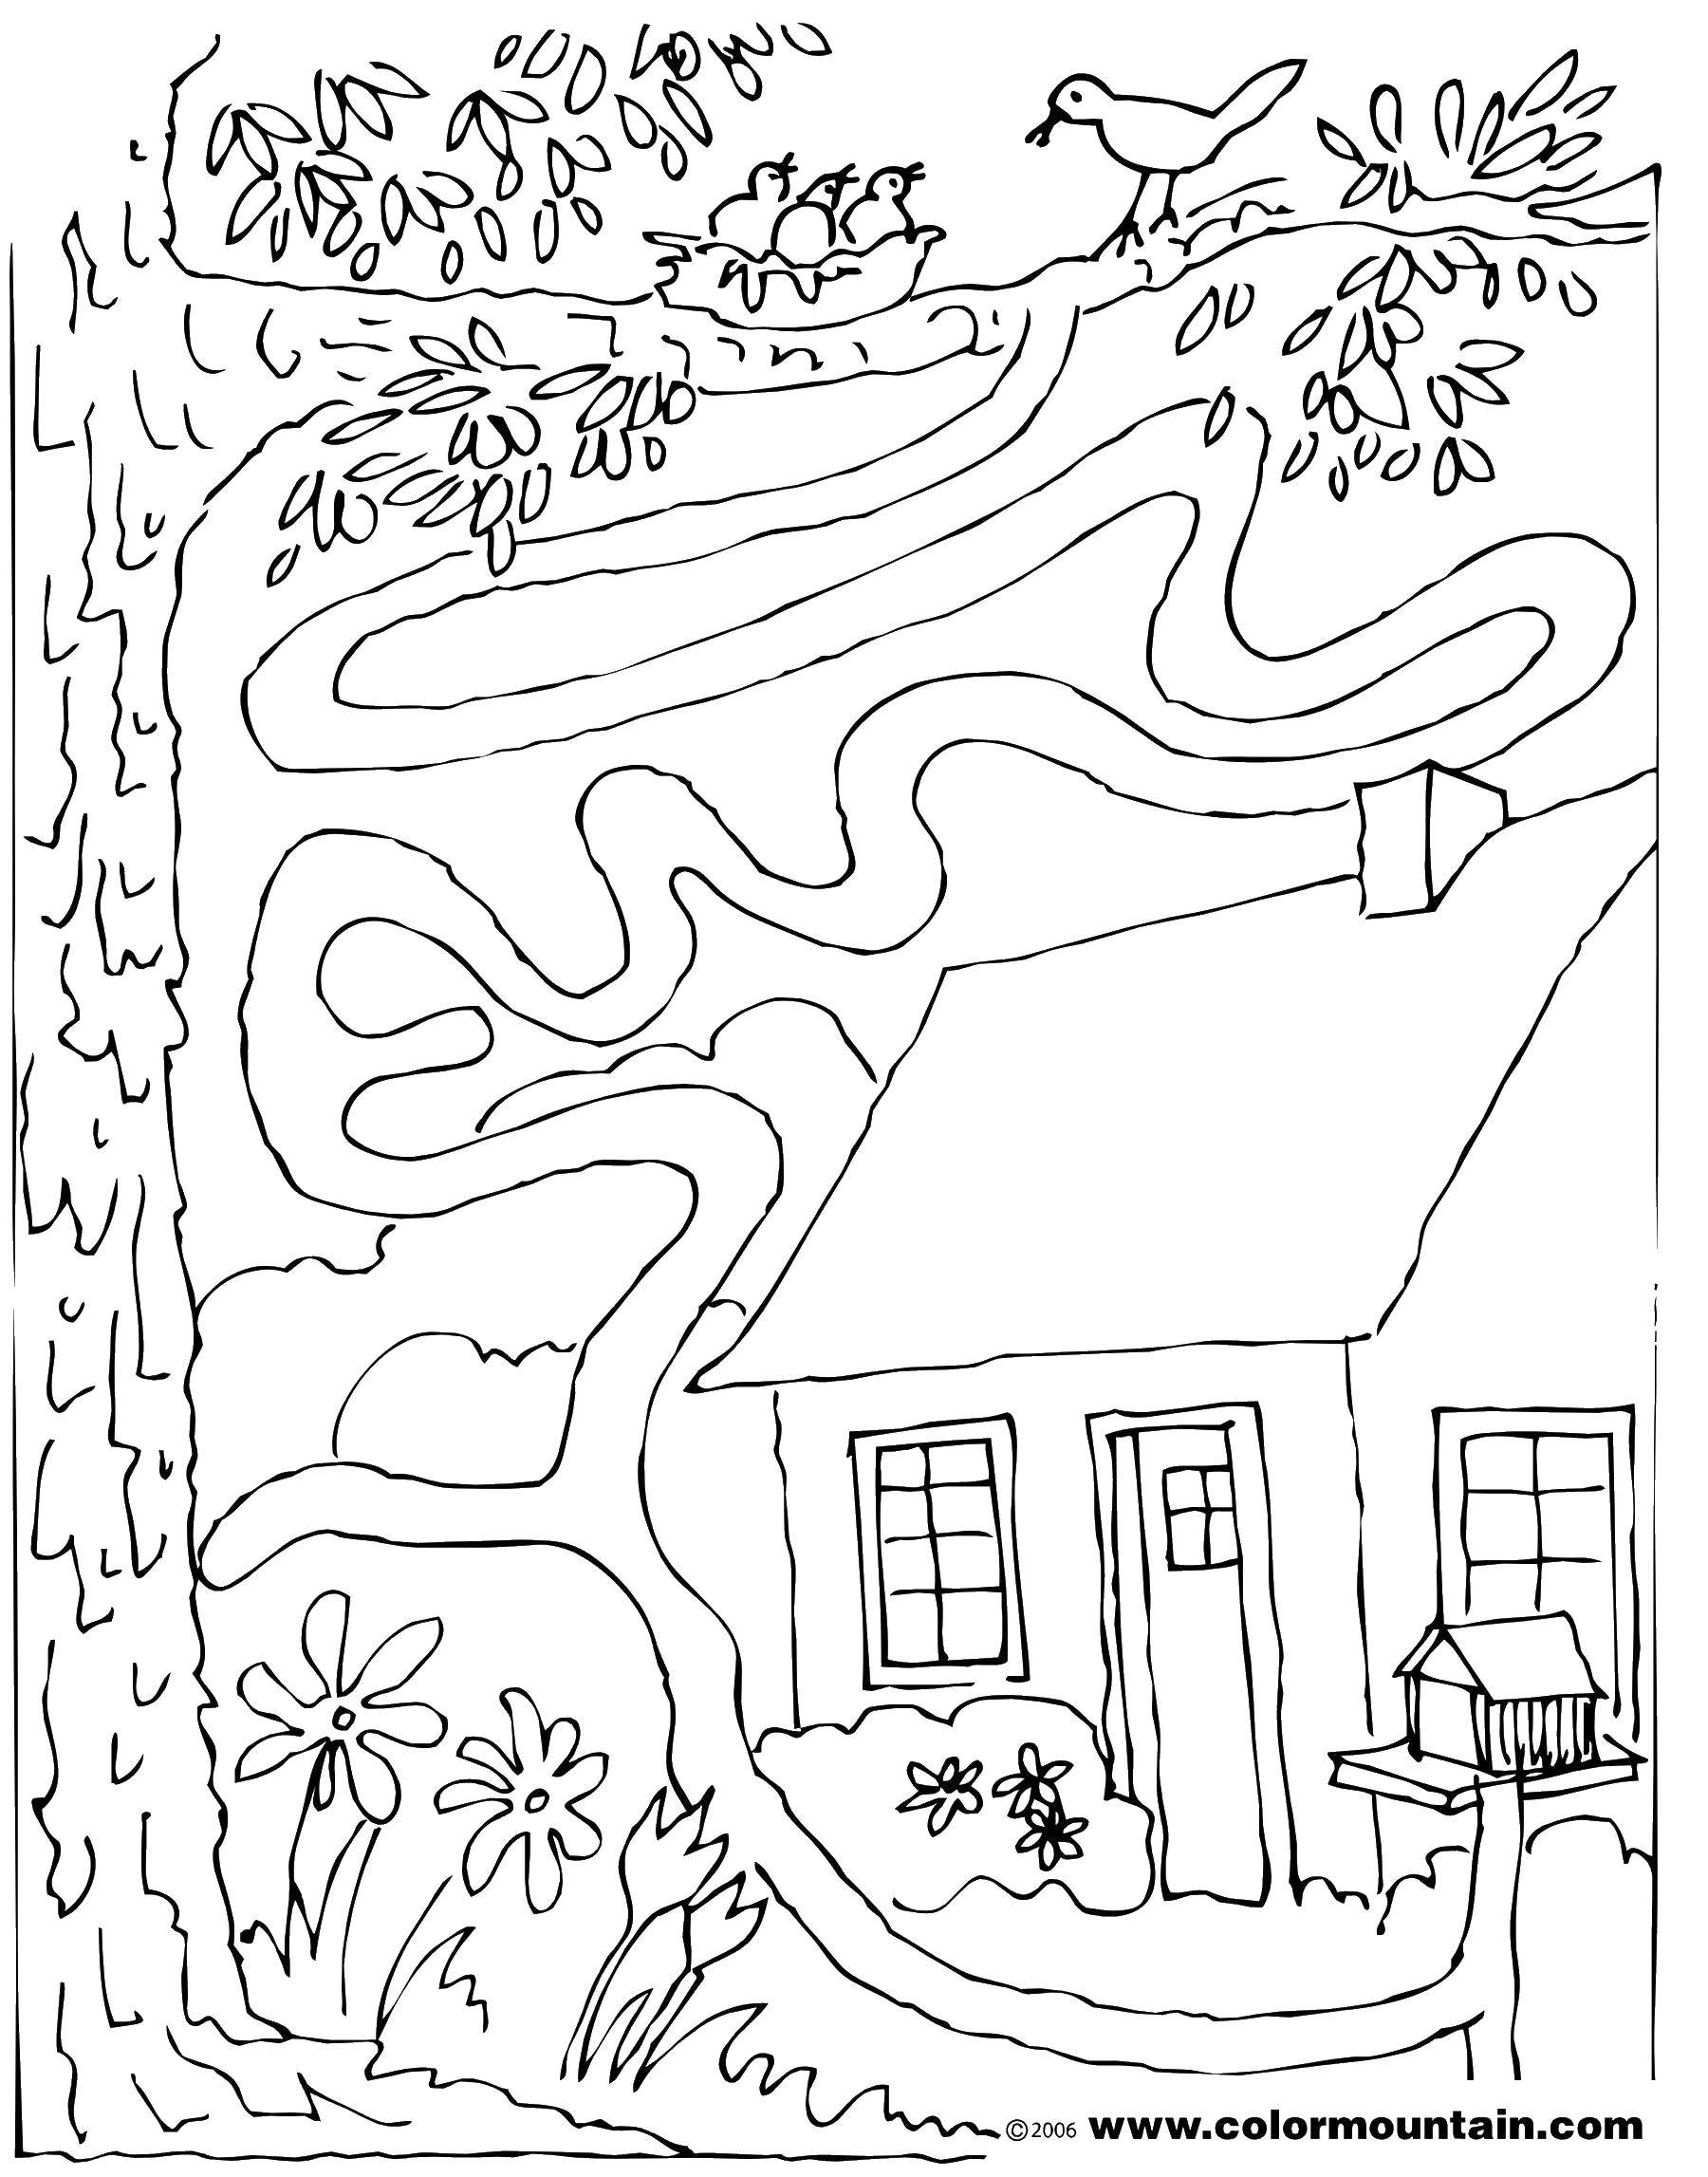 Coloring Get through the labyrinth. Category Mazes. Tags:  Maze, logic.